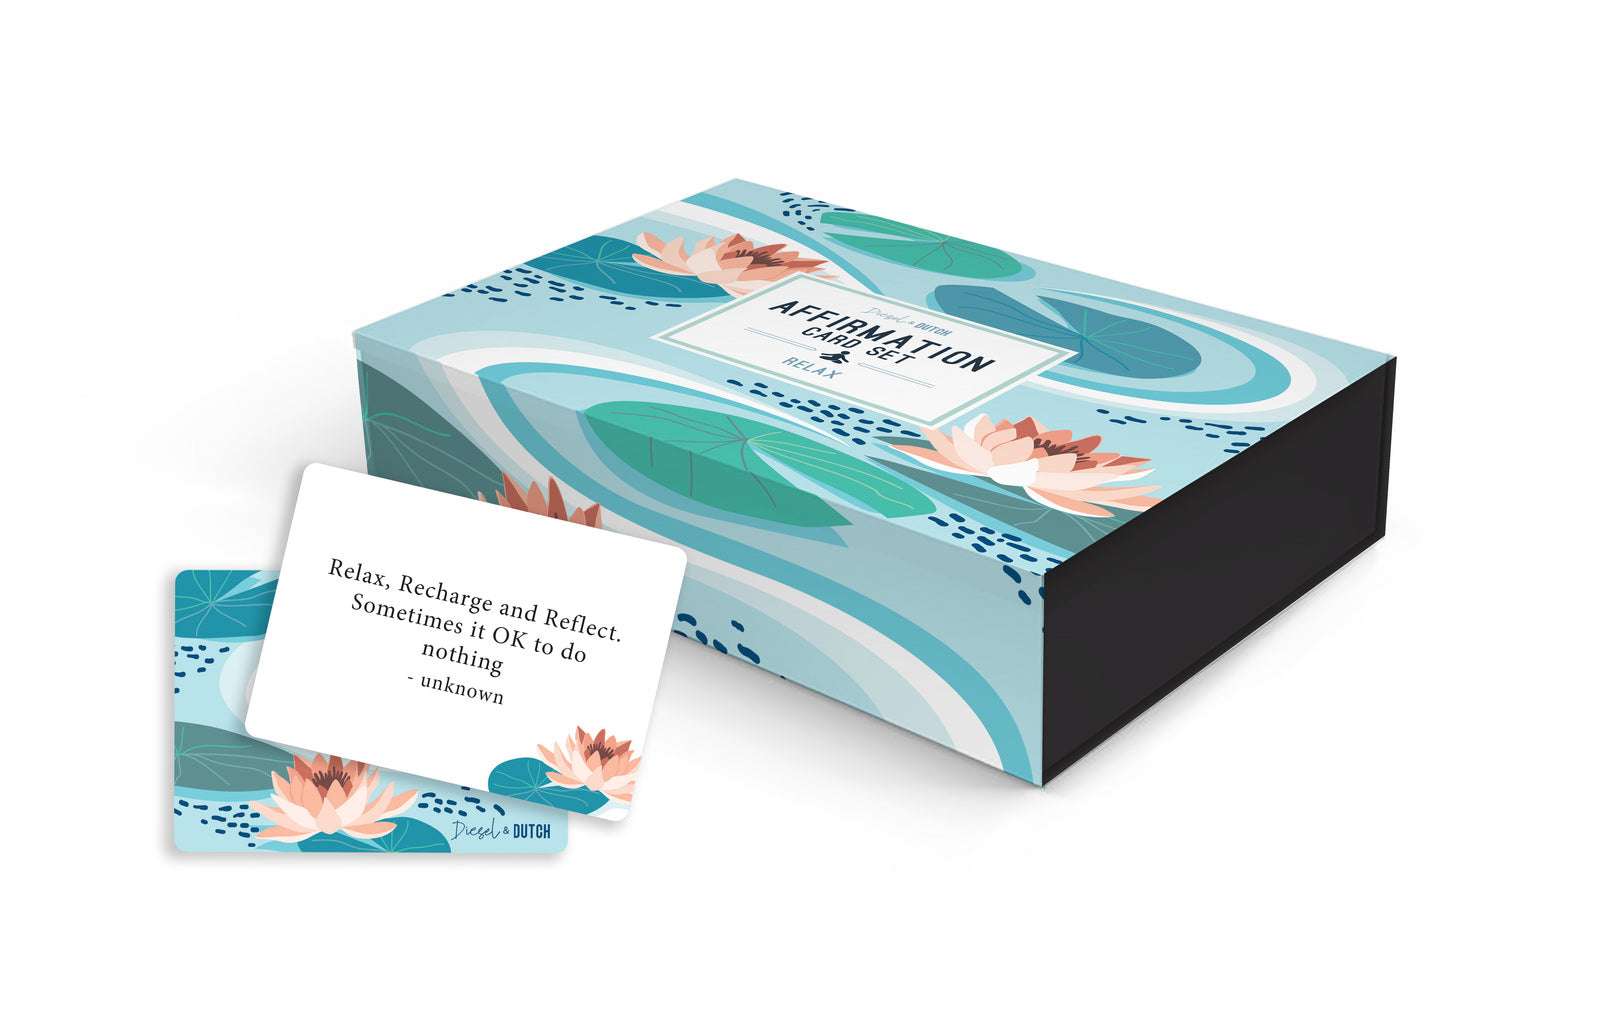 Affirmation Cards - Relax